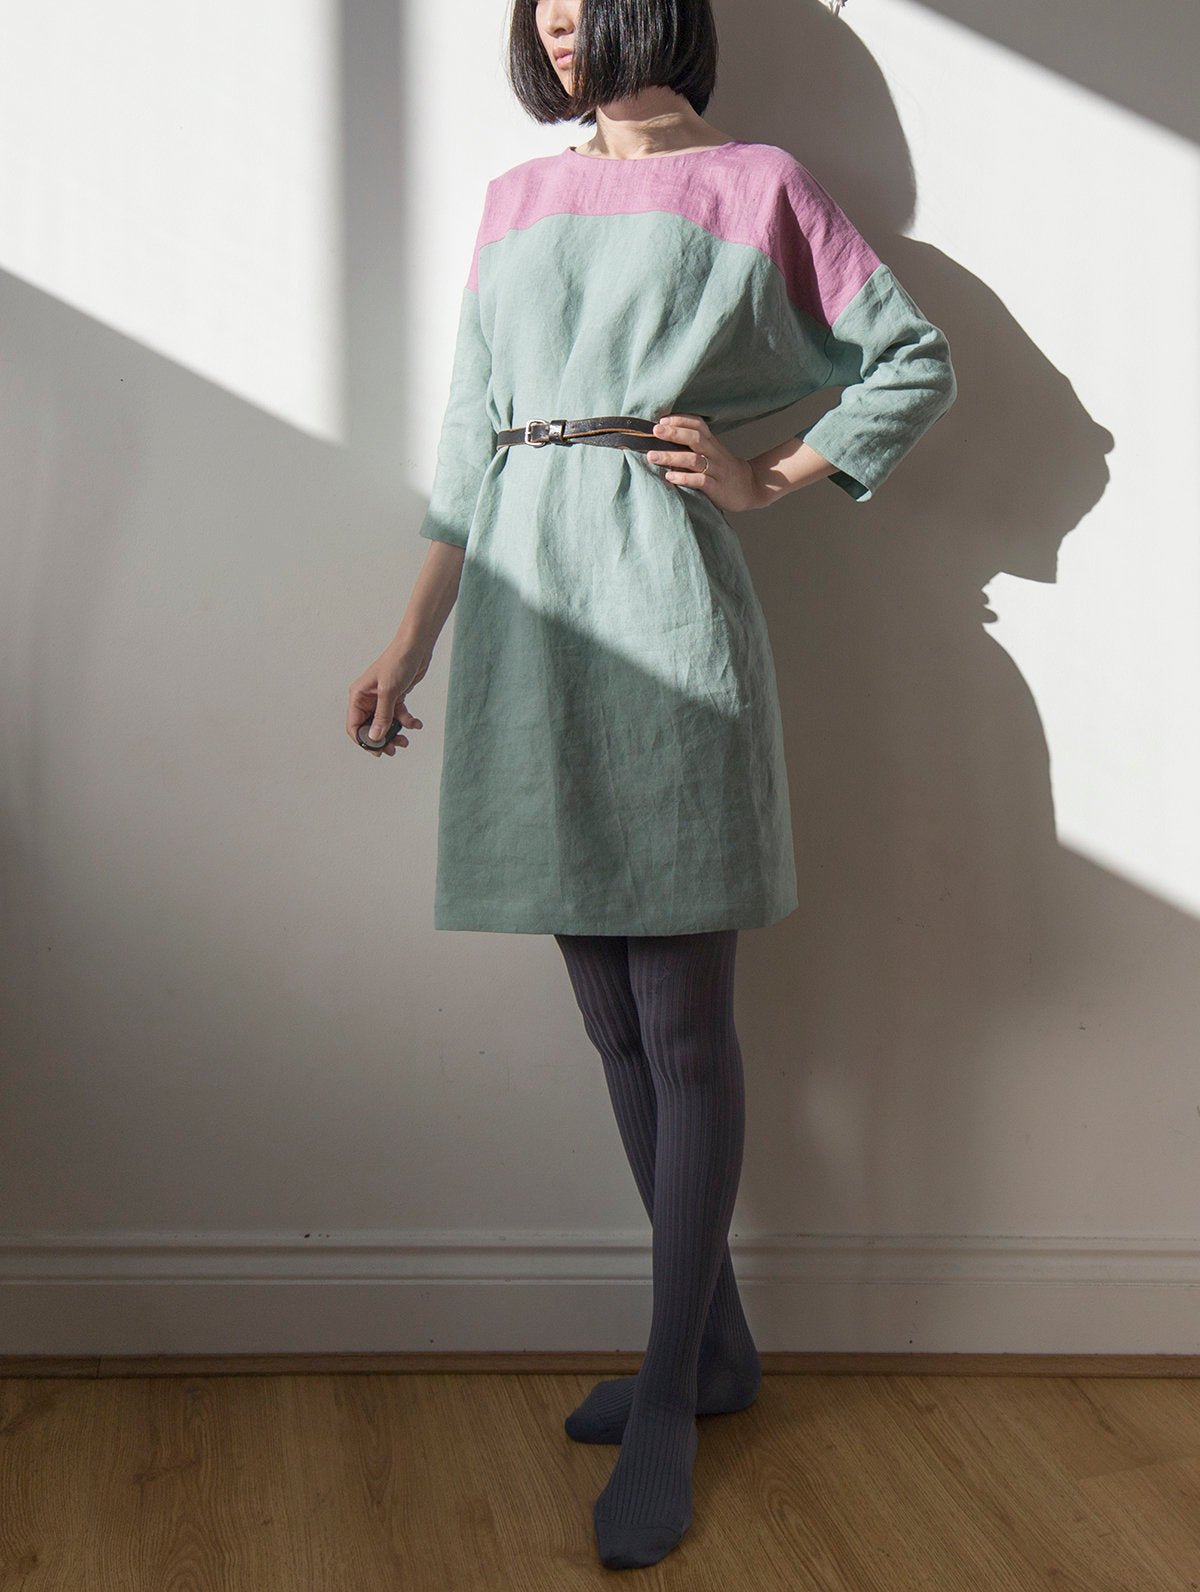 Wild orchid pink and celadon blue linen dress